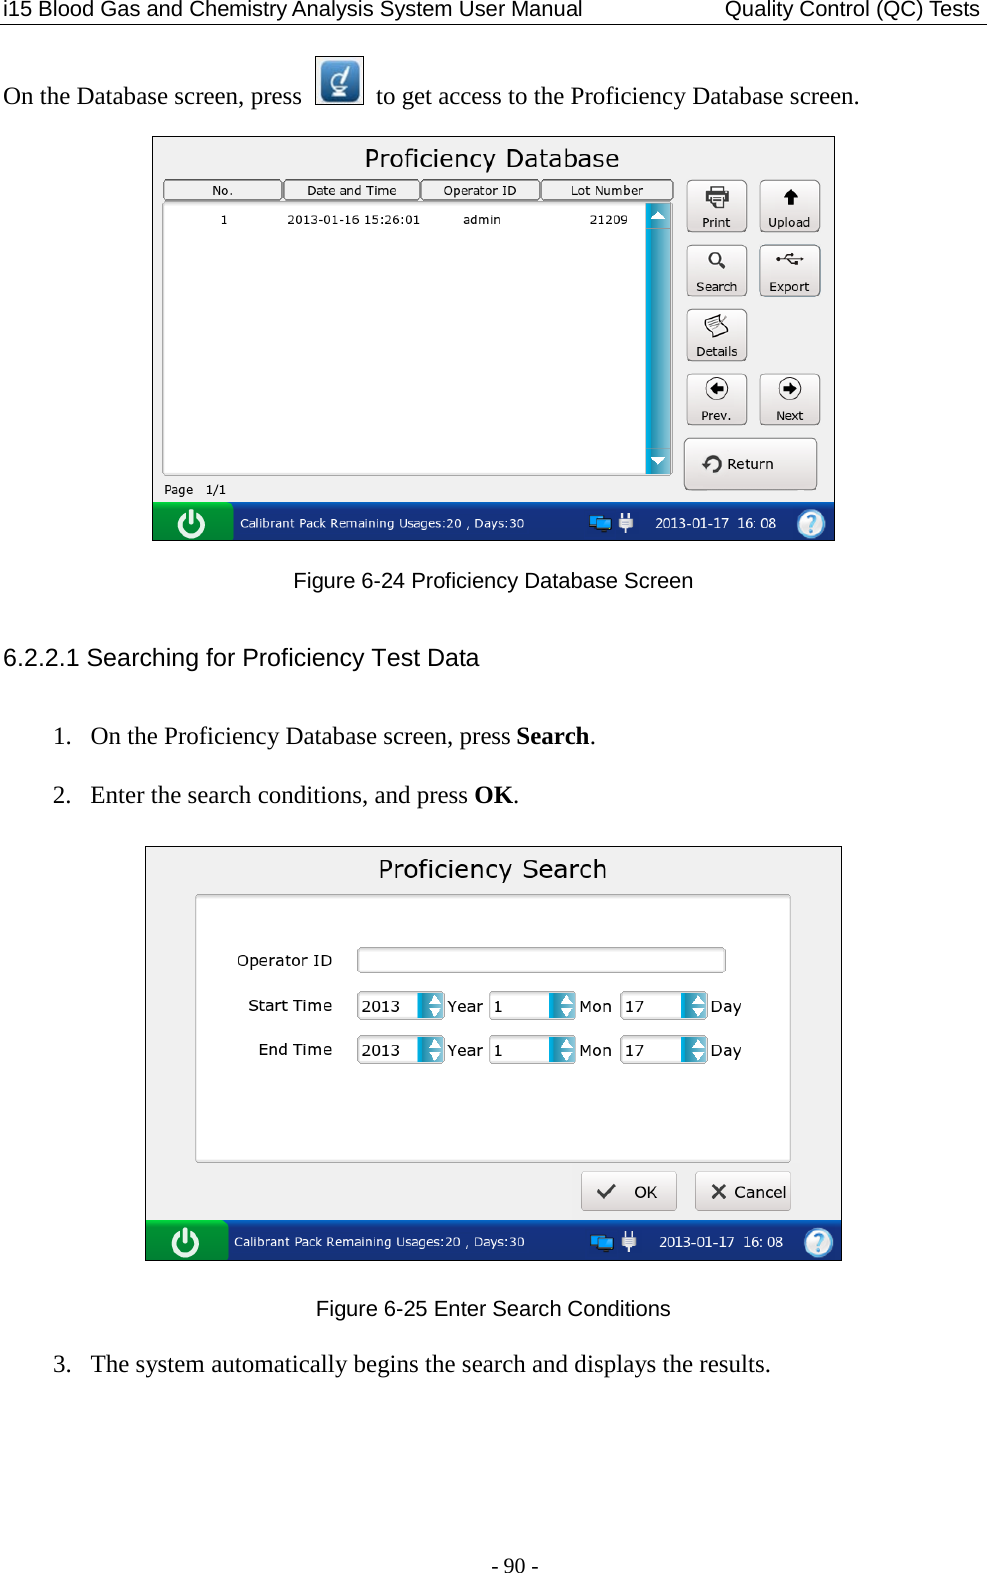 i15 Blood Gas and Chemistry Analysis System User Manual               Quality Control (QC) Tests - 90 - On the Database screen, press   to get access to the Proficiency Database screen.  Figure 6-24 Proficiency Database Screen 6.2.2.1 Searching for Proficiency Test Data 1. On the Proficiency Database screen, press Search. 2. Enter the search conditions, and press OK.  Figure 6-25 Enter Search Conditions 3. The system automatically begins the search and displays the results. 